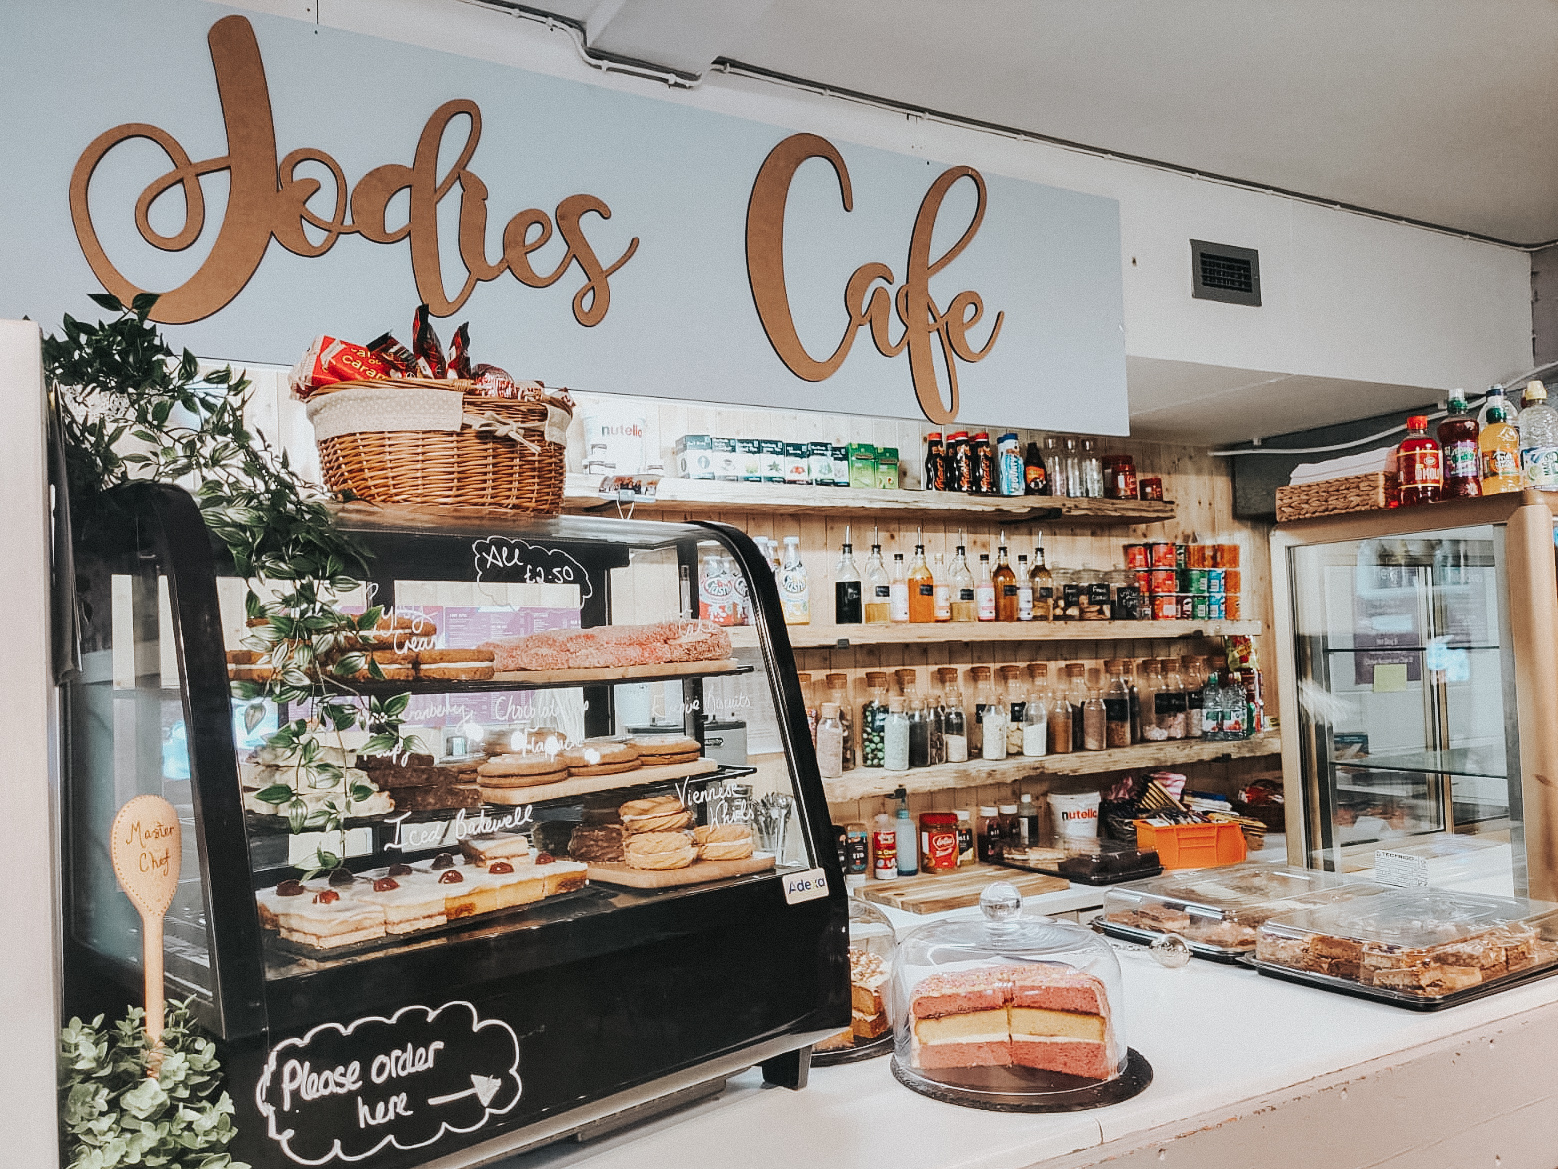 jodies cafe lockerbie review visit dumfries and galloway